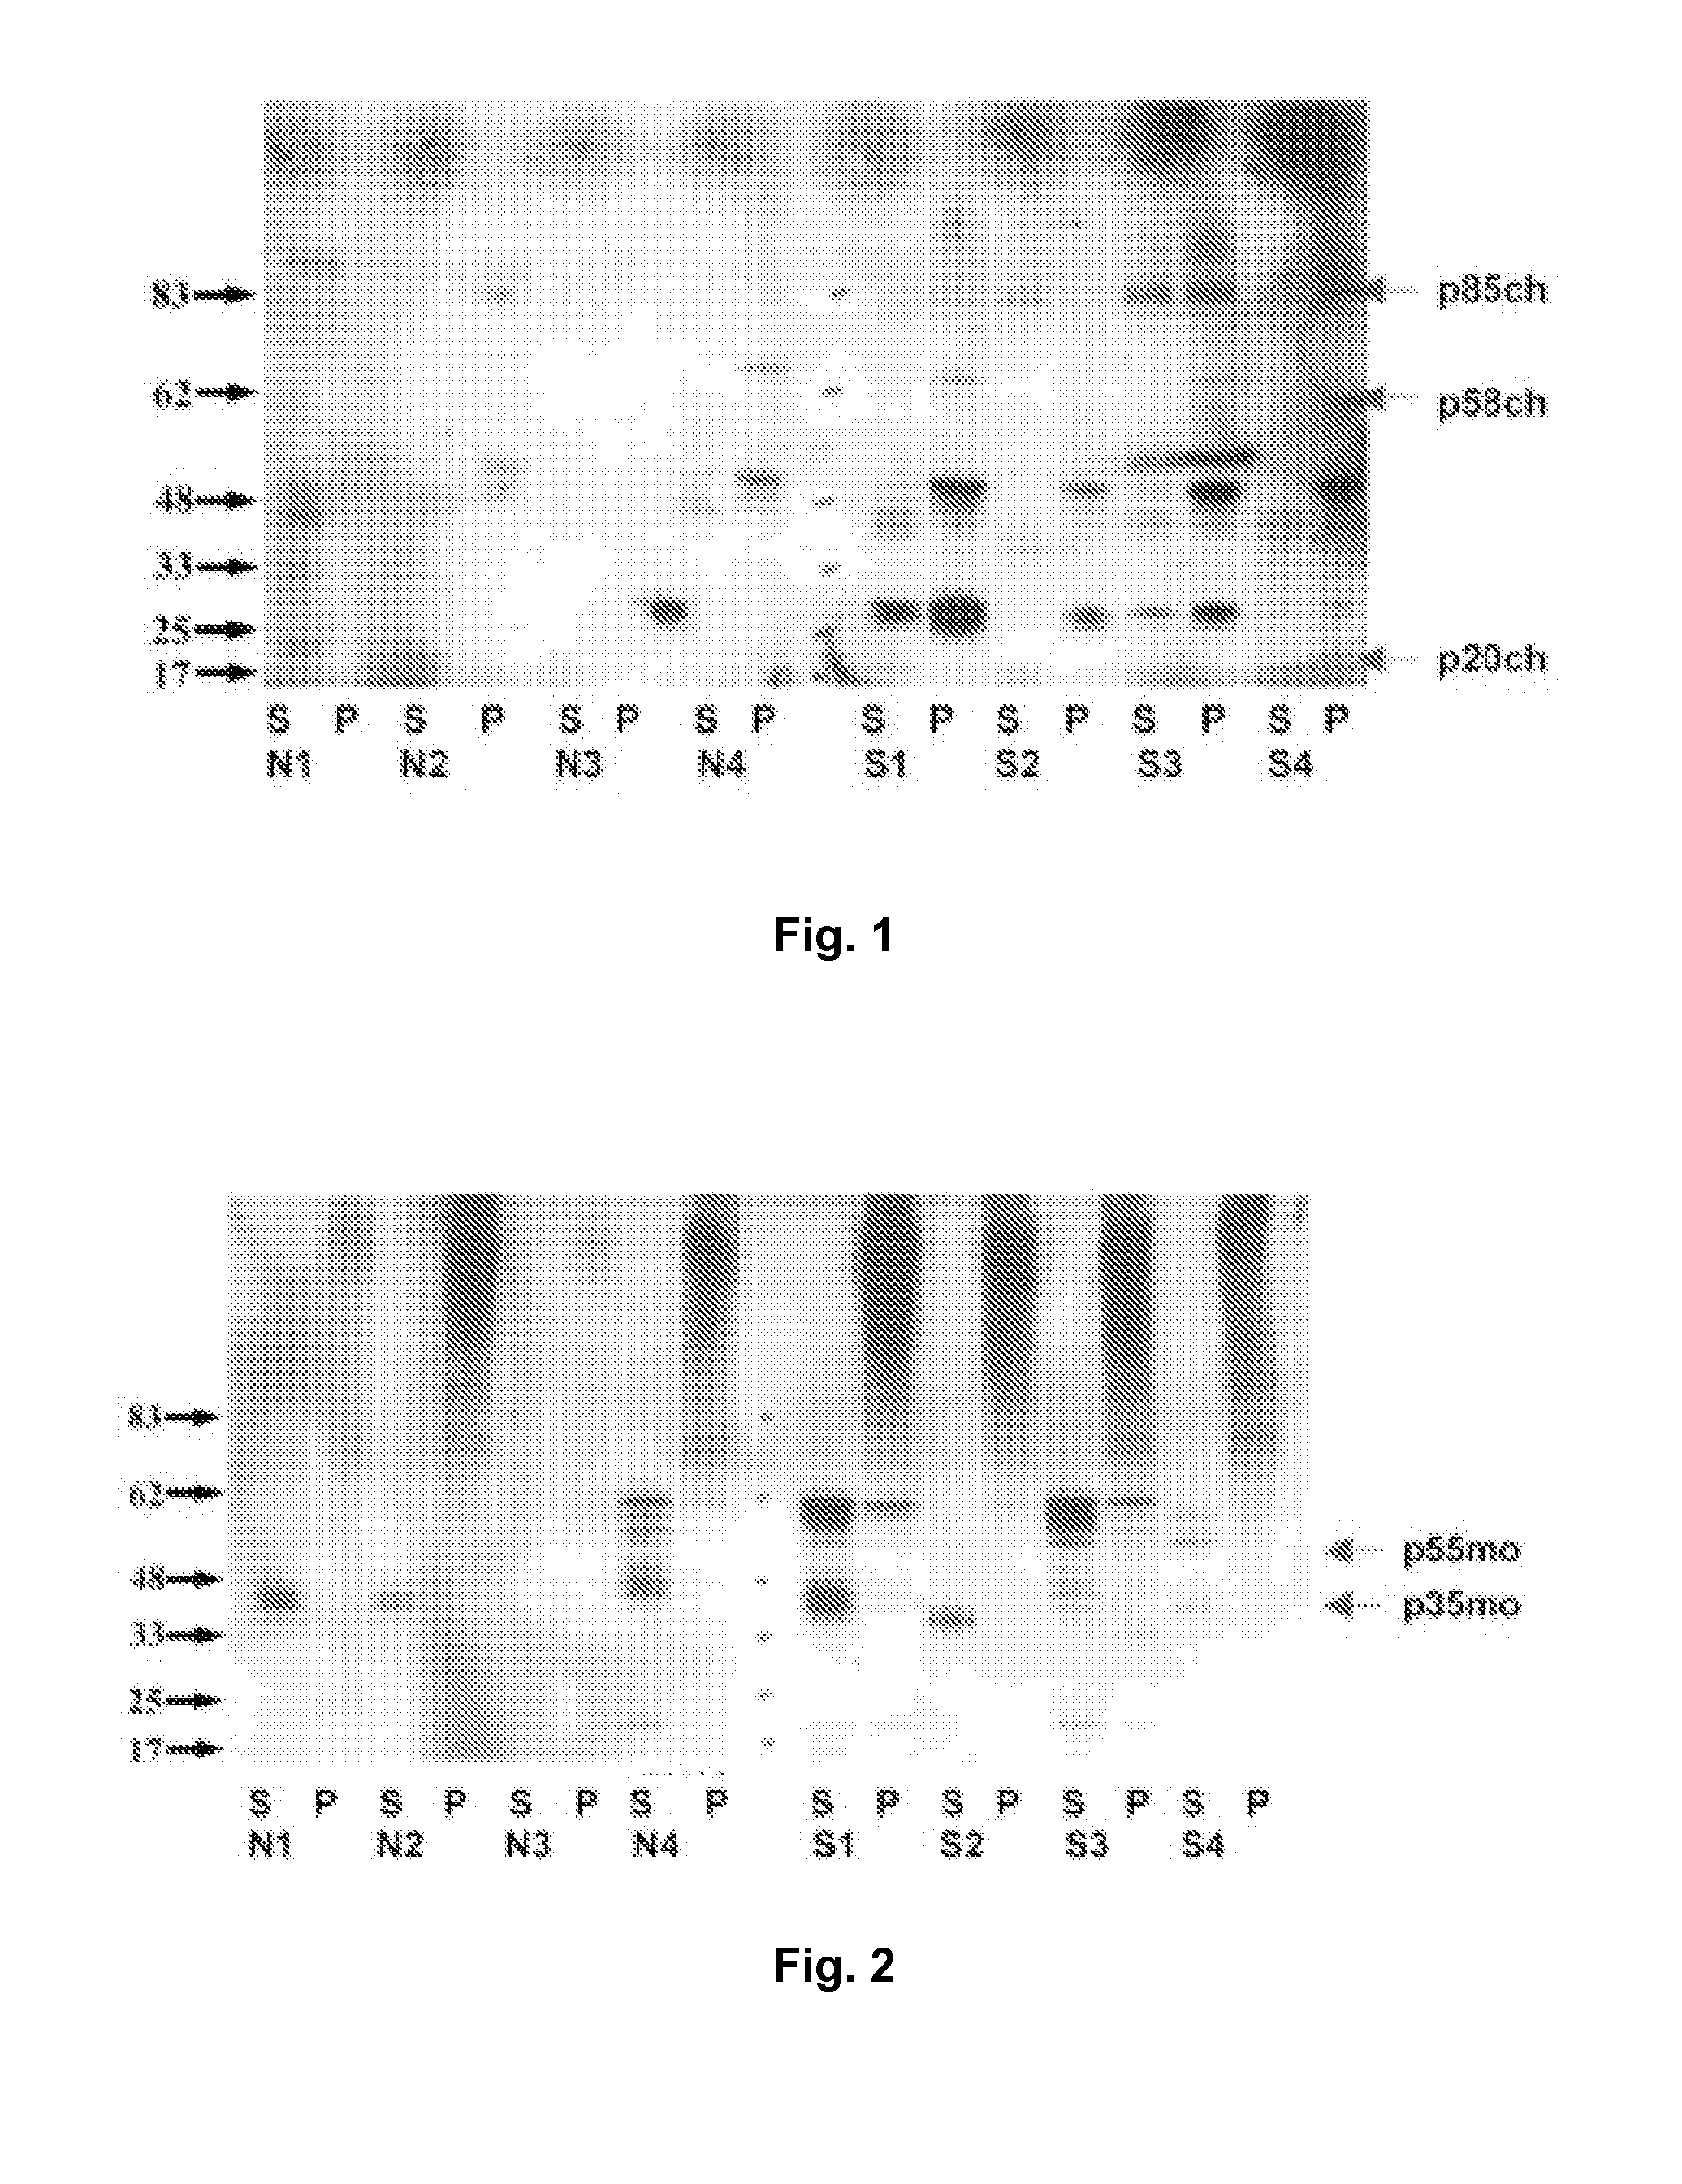 Antibody for Diagnosing and Treating Neuropsychiatric Diseases, in Particular Schizophrenia, Depression and Bipolar Affective Disorders